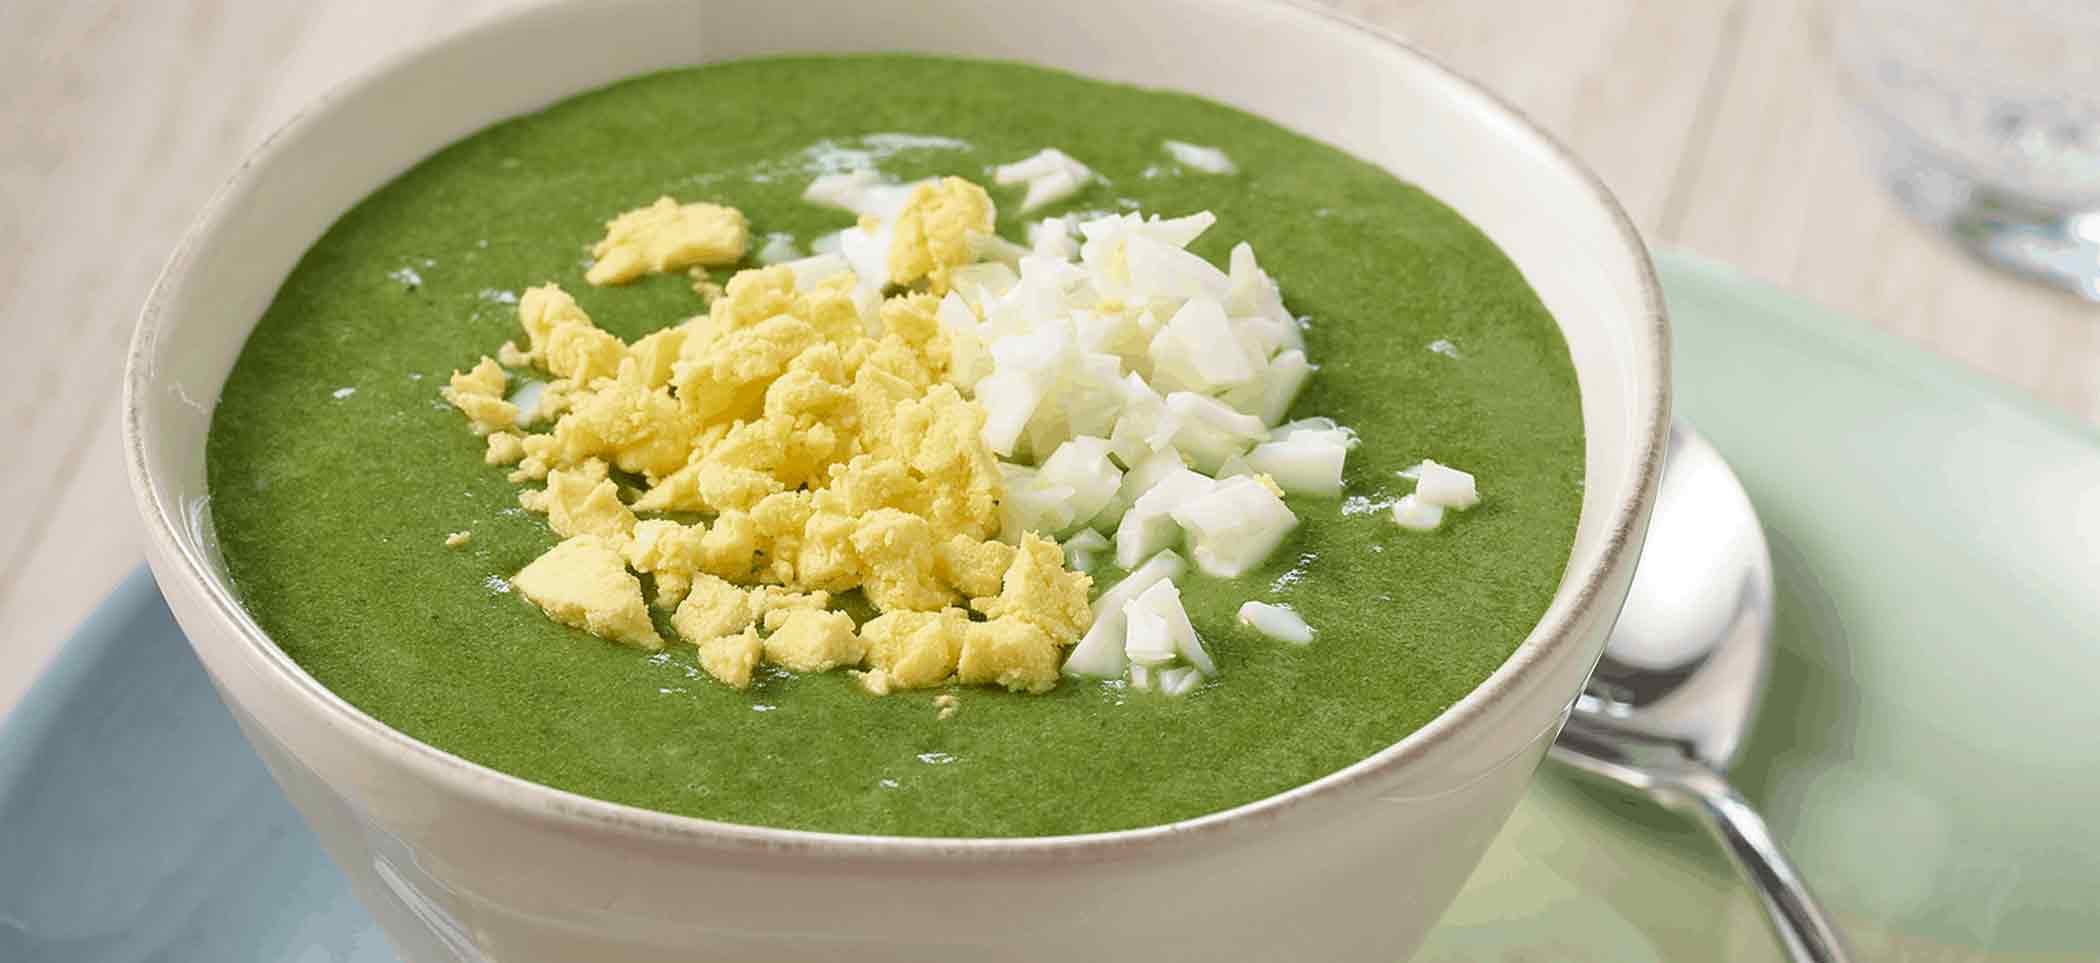 Power Spinach Bisque with Egg